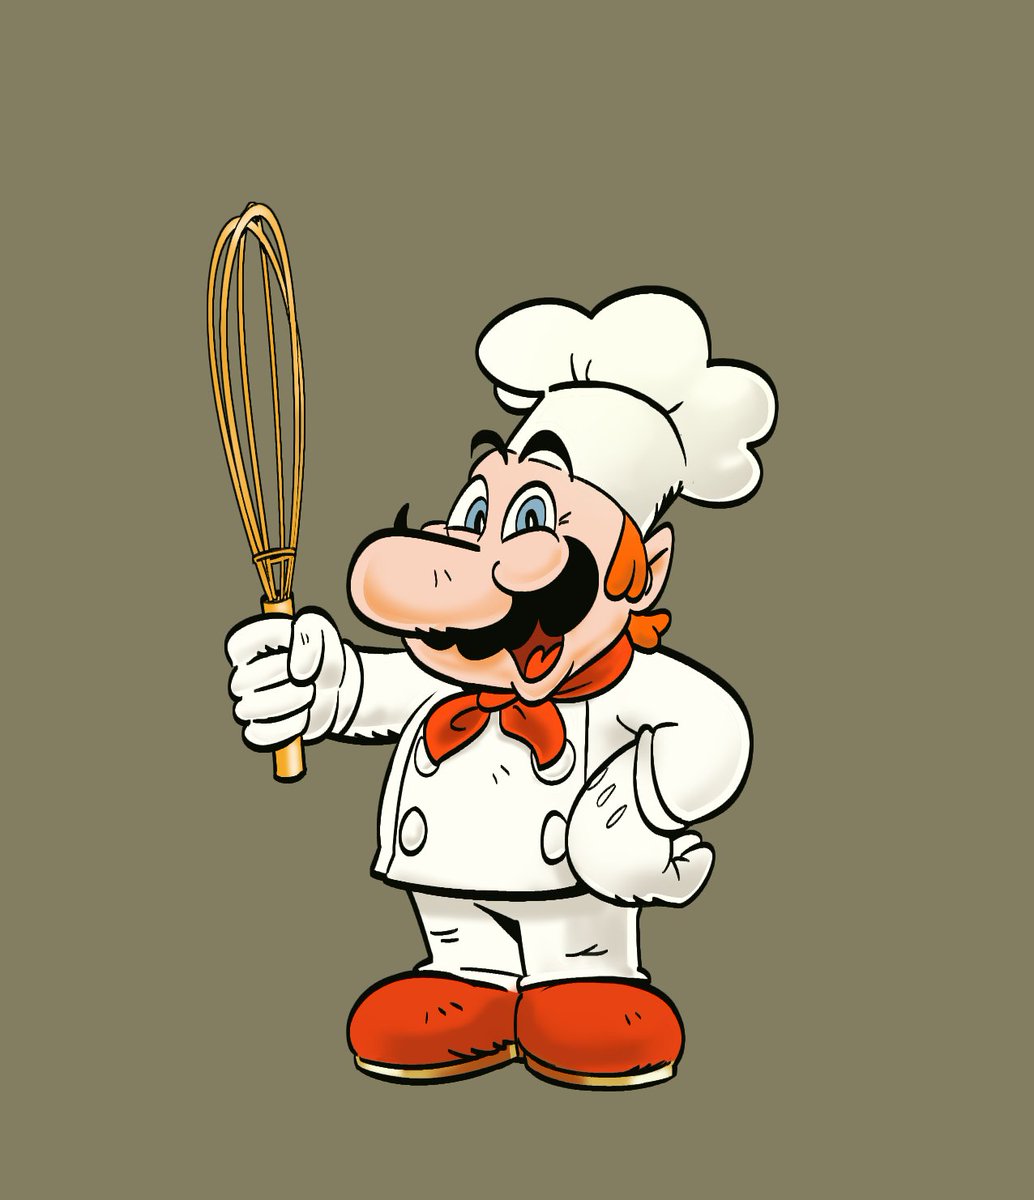 here's the chef mario i drew for this collab :-)